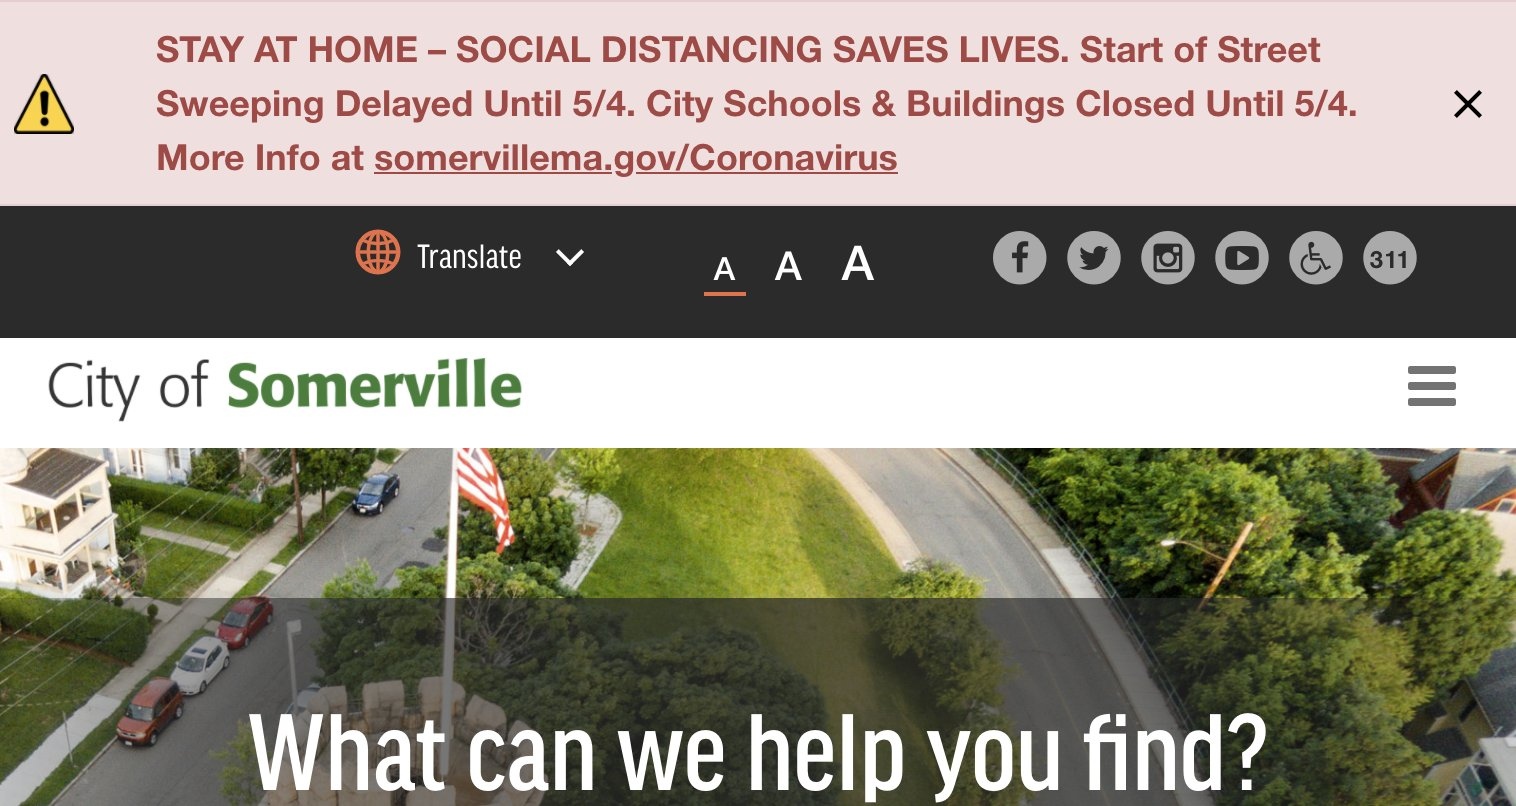 A pink banner taking up one quarter of the screenshot of the City of Somerville homepage. The banner has an alert icon, body copy, and a close button. The body copy reads, 'Stay at home - social distancing saves lives. Start of Street Sweeping Delayed Until 5/4. City Schools & Buildings Closed Until 5/4. More Info at somervillema.gov forward slash Coronavirus'.